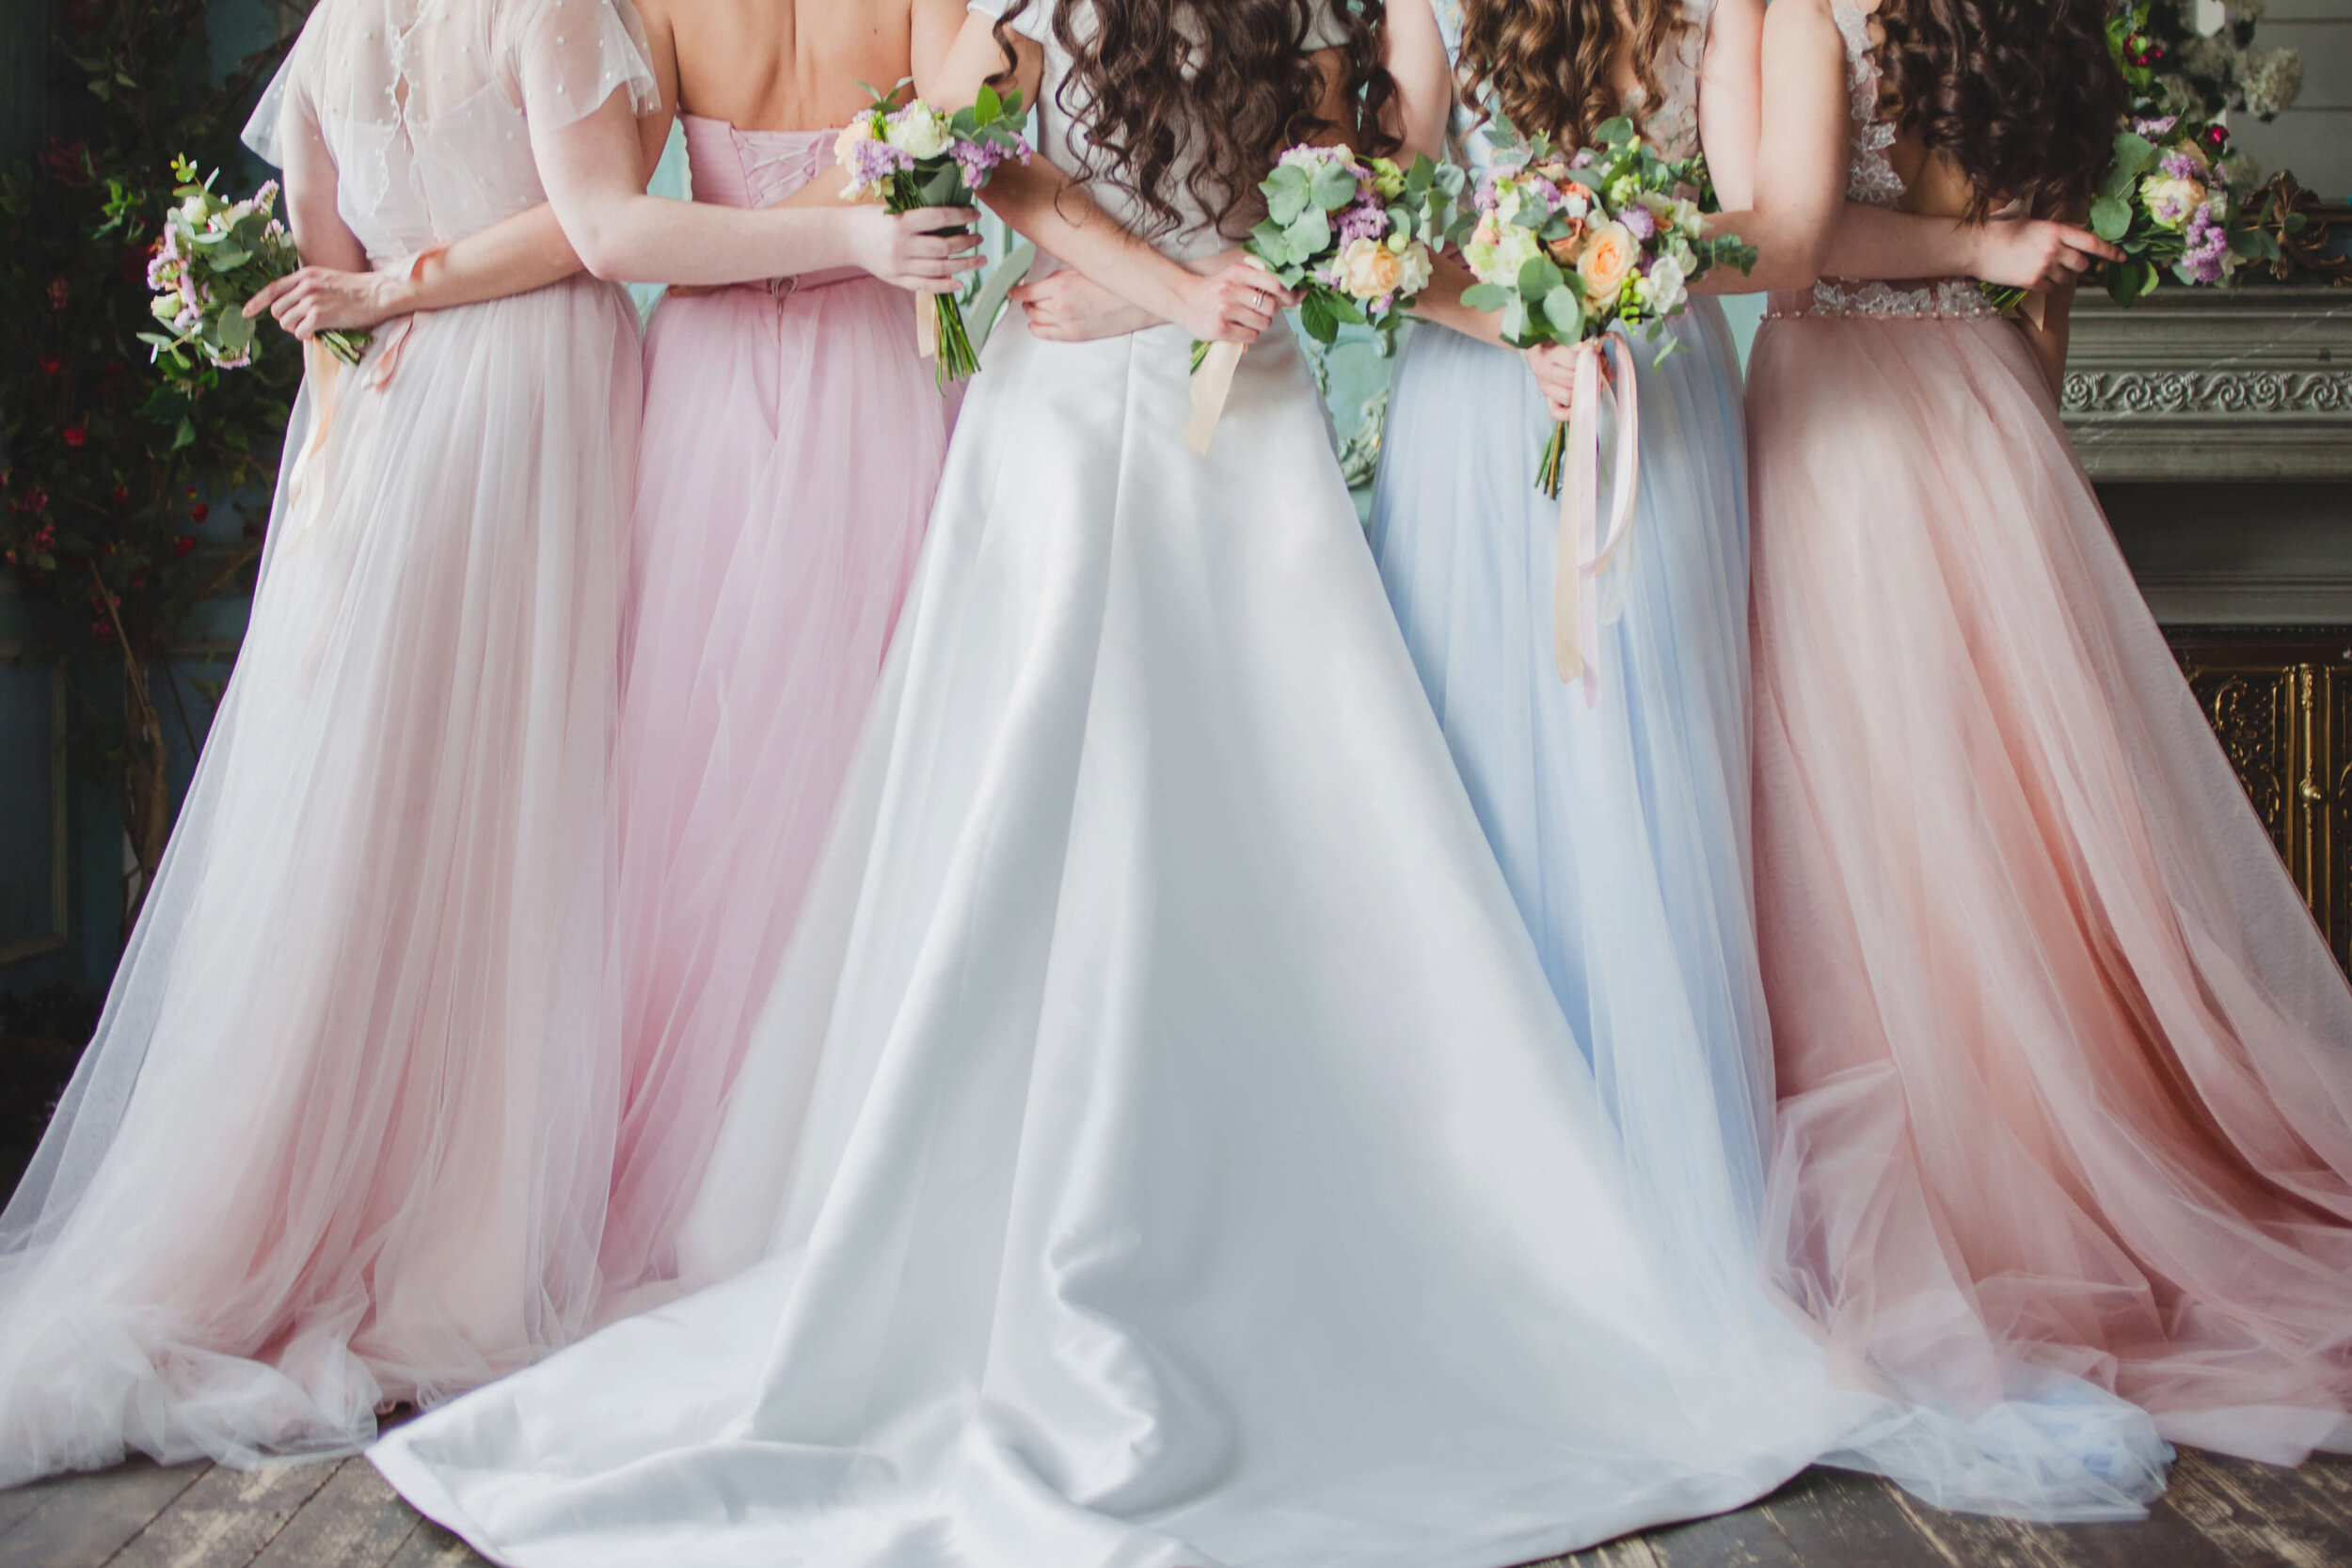 Real talk: Your bridesmaids don't want to wear matching dresses